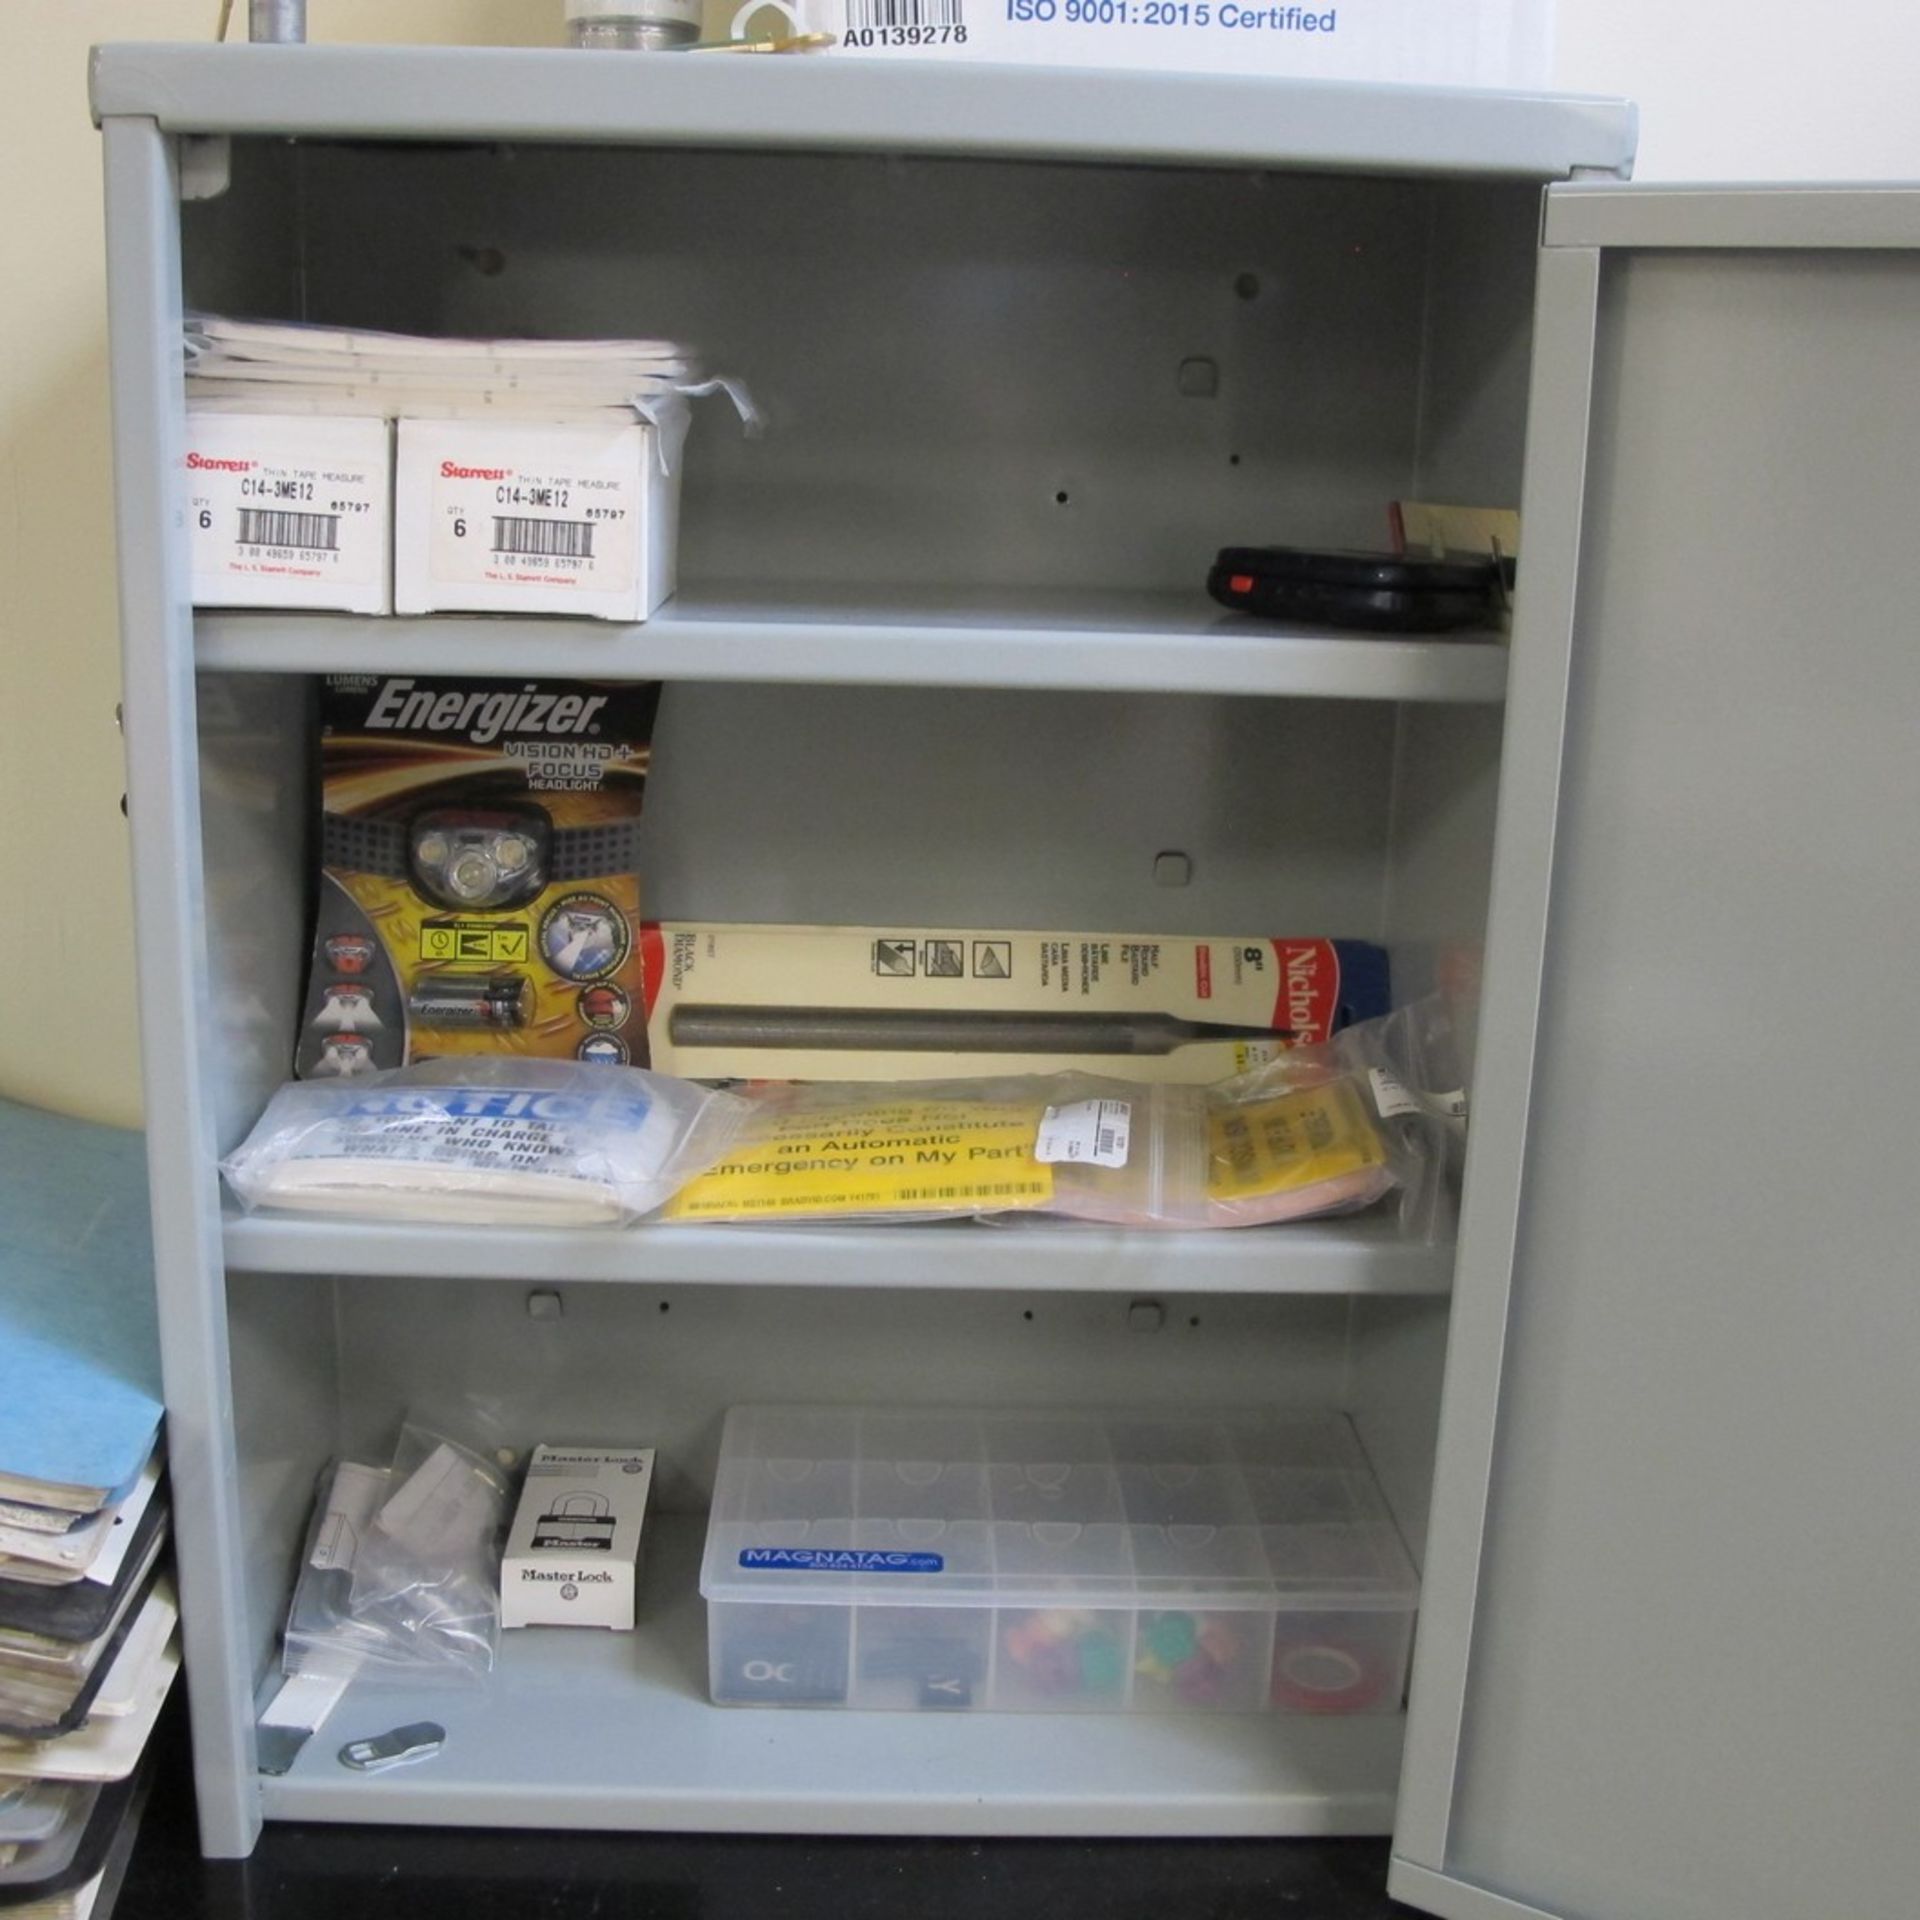 LOT OF (3) SHELVING UNITS/CABINETS W/ PARTS AS LABELLED AND SUPPLIES (2ND FLOOR NORTH OFFICES) - Image 3 of 5